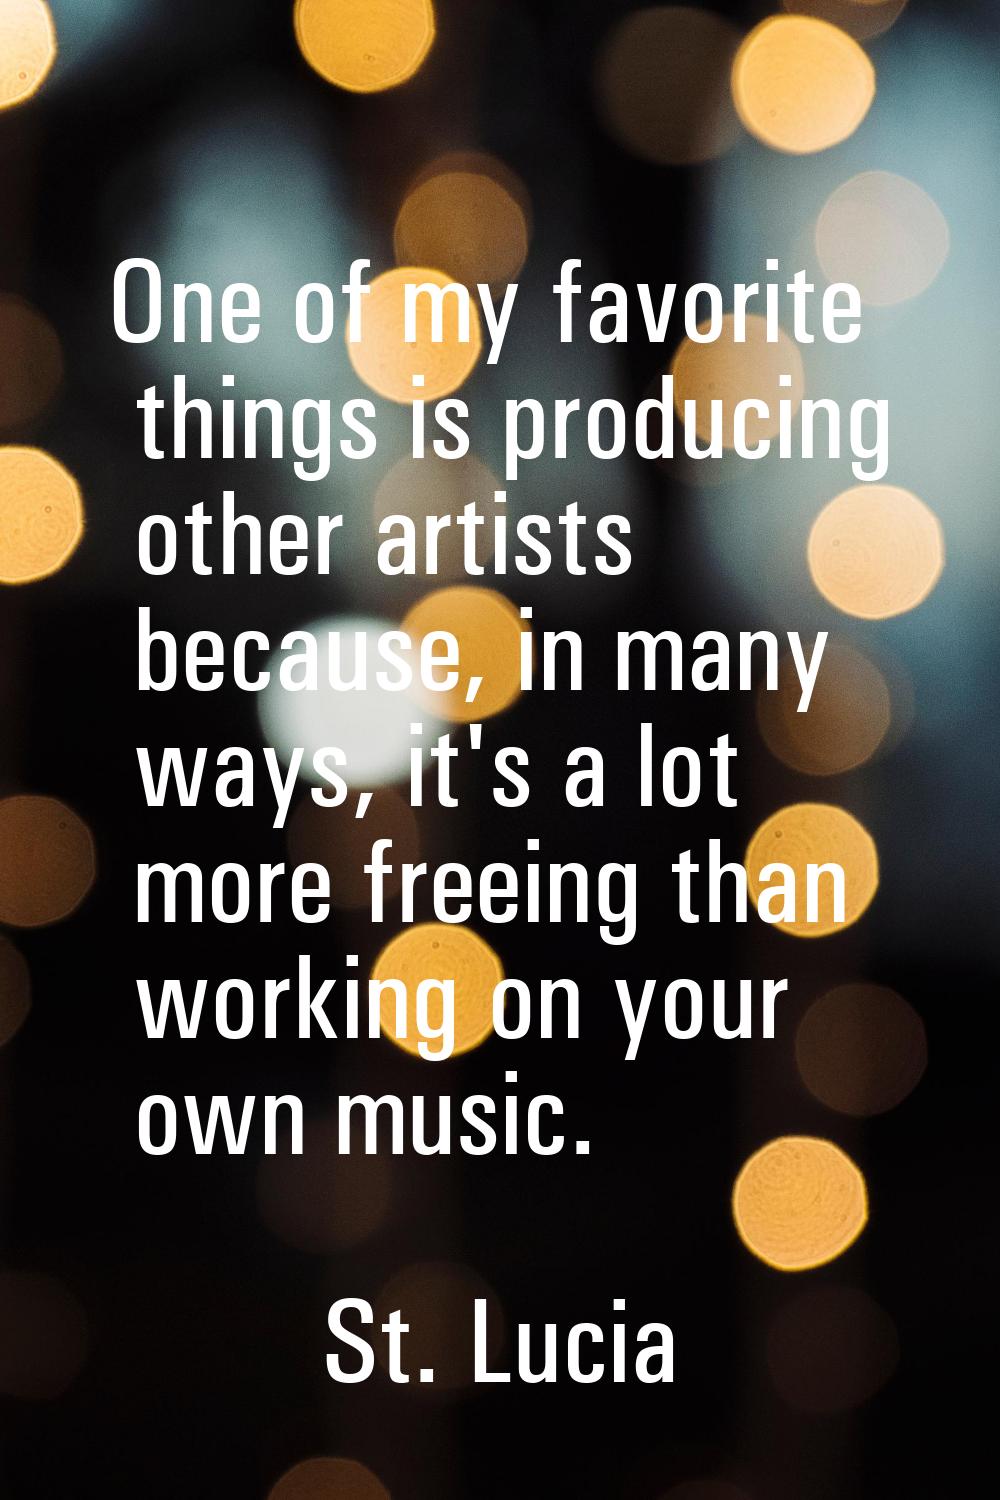 One of my favorite things is producing other artists because, in many ways, it's a lot more freeing